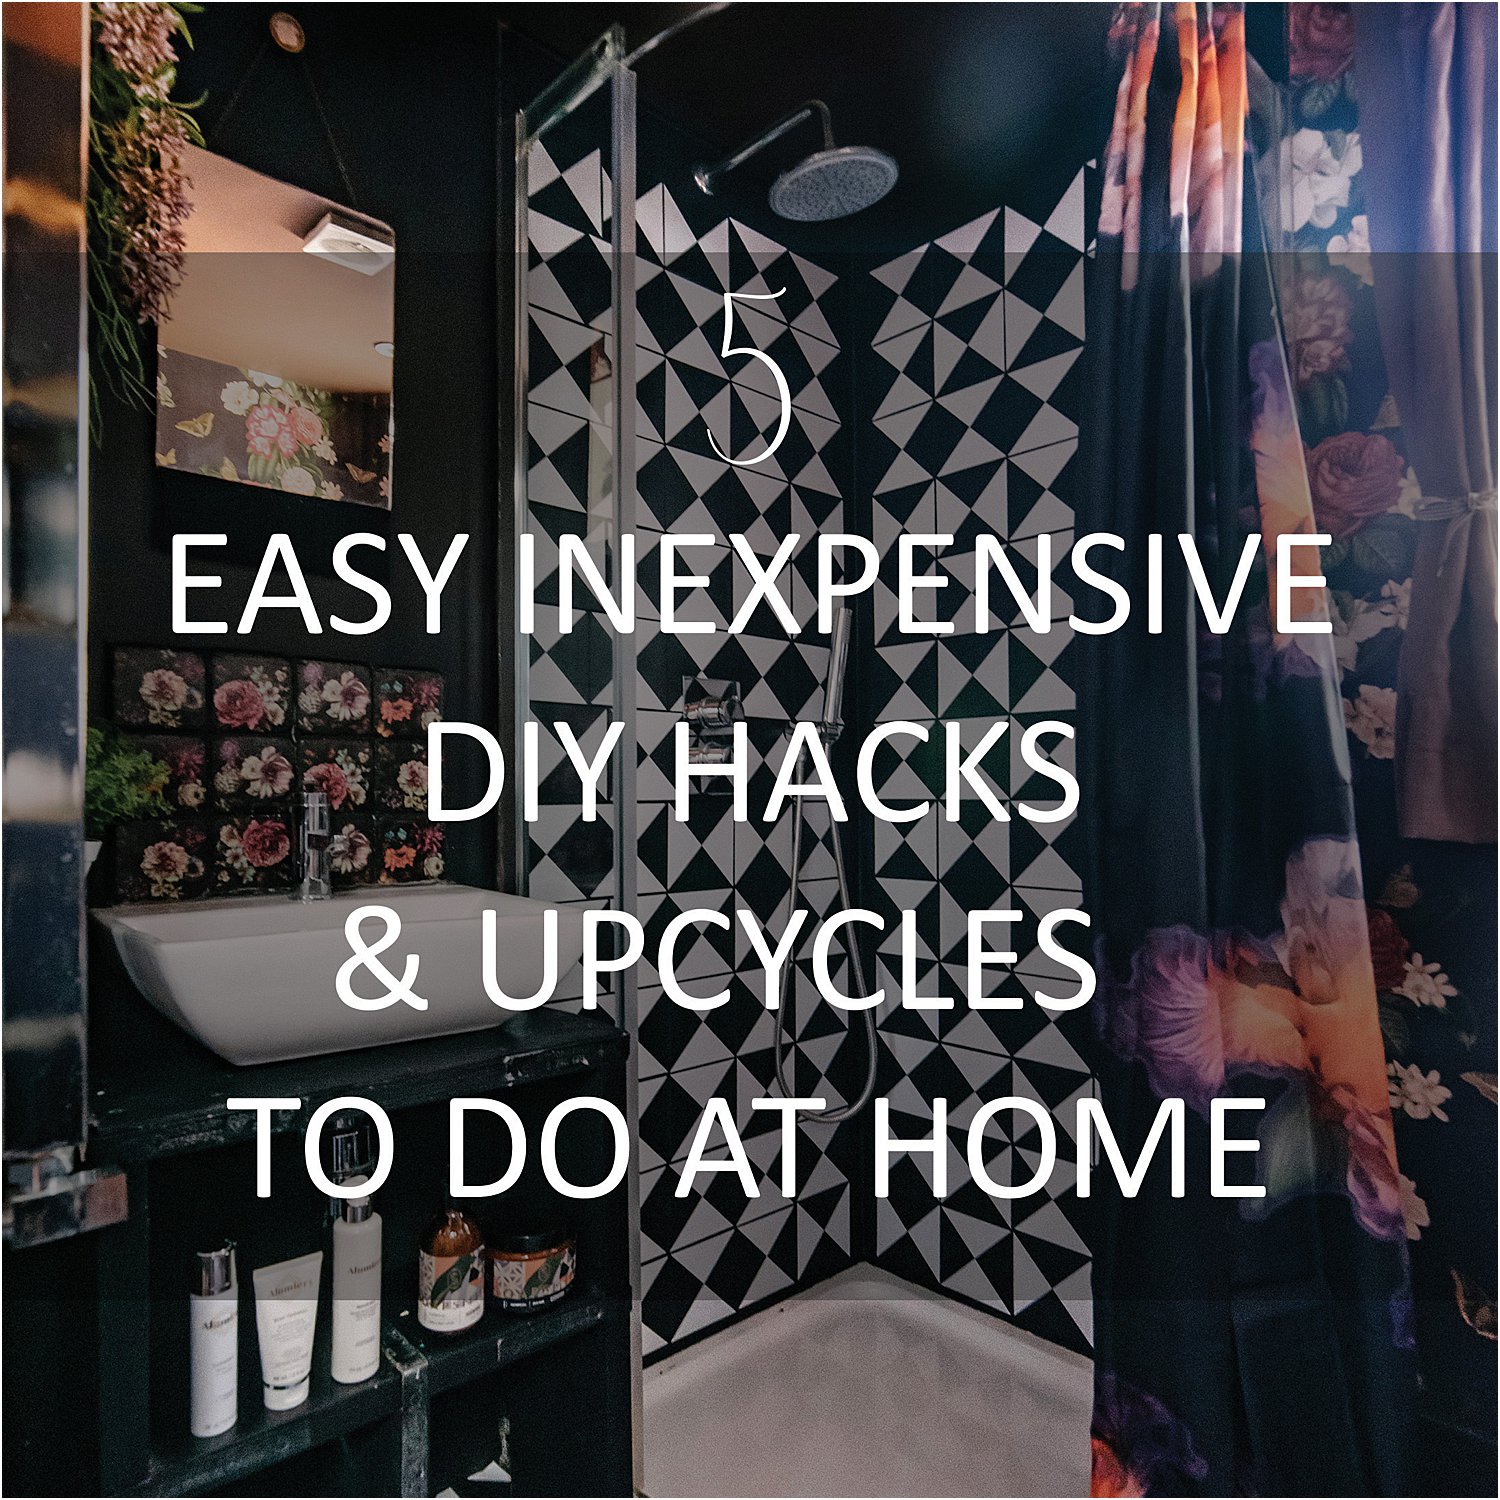 5-quick-easy-hacks-upcycle-in-the-home-interiors-ideas-layered-home